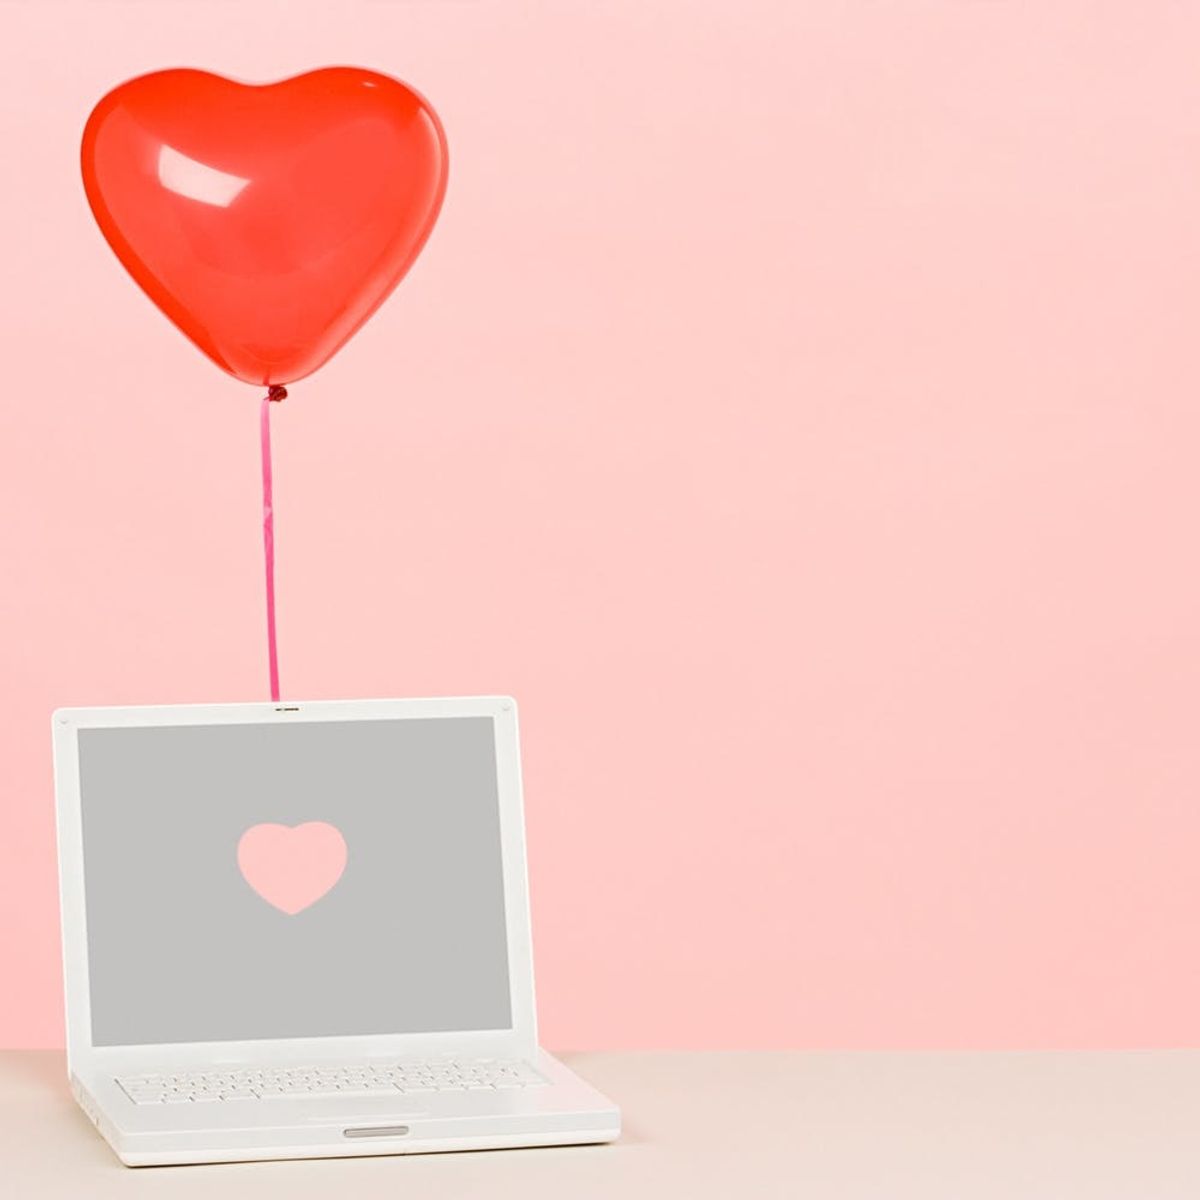 Using These Words Will Boost Your Chances of Online Love This Summer